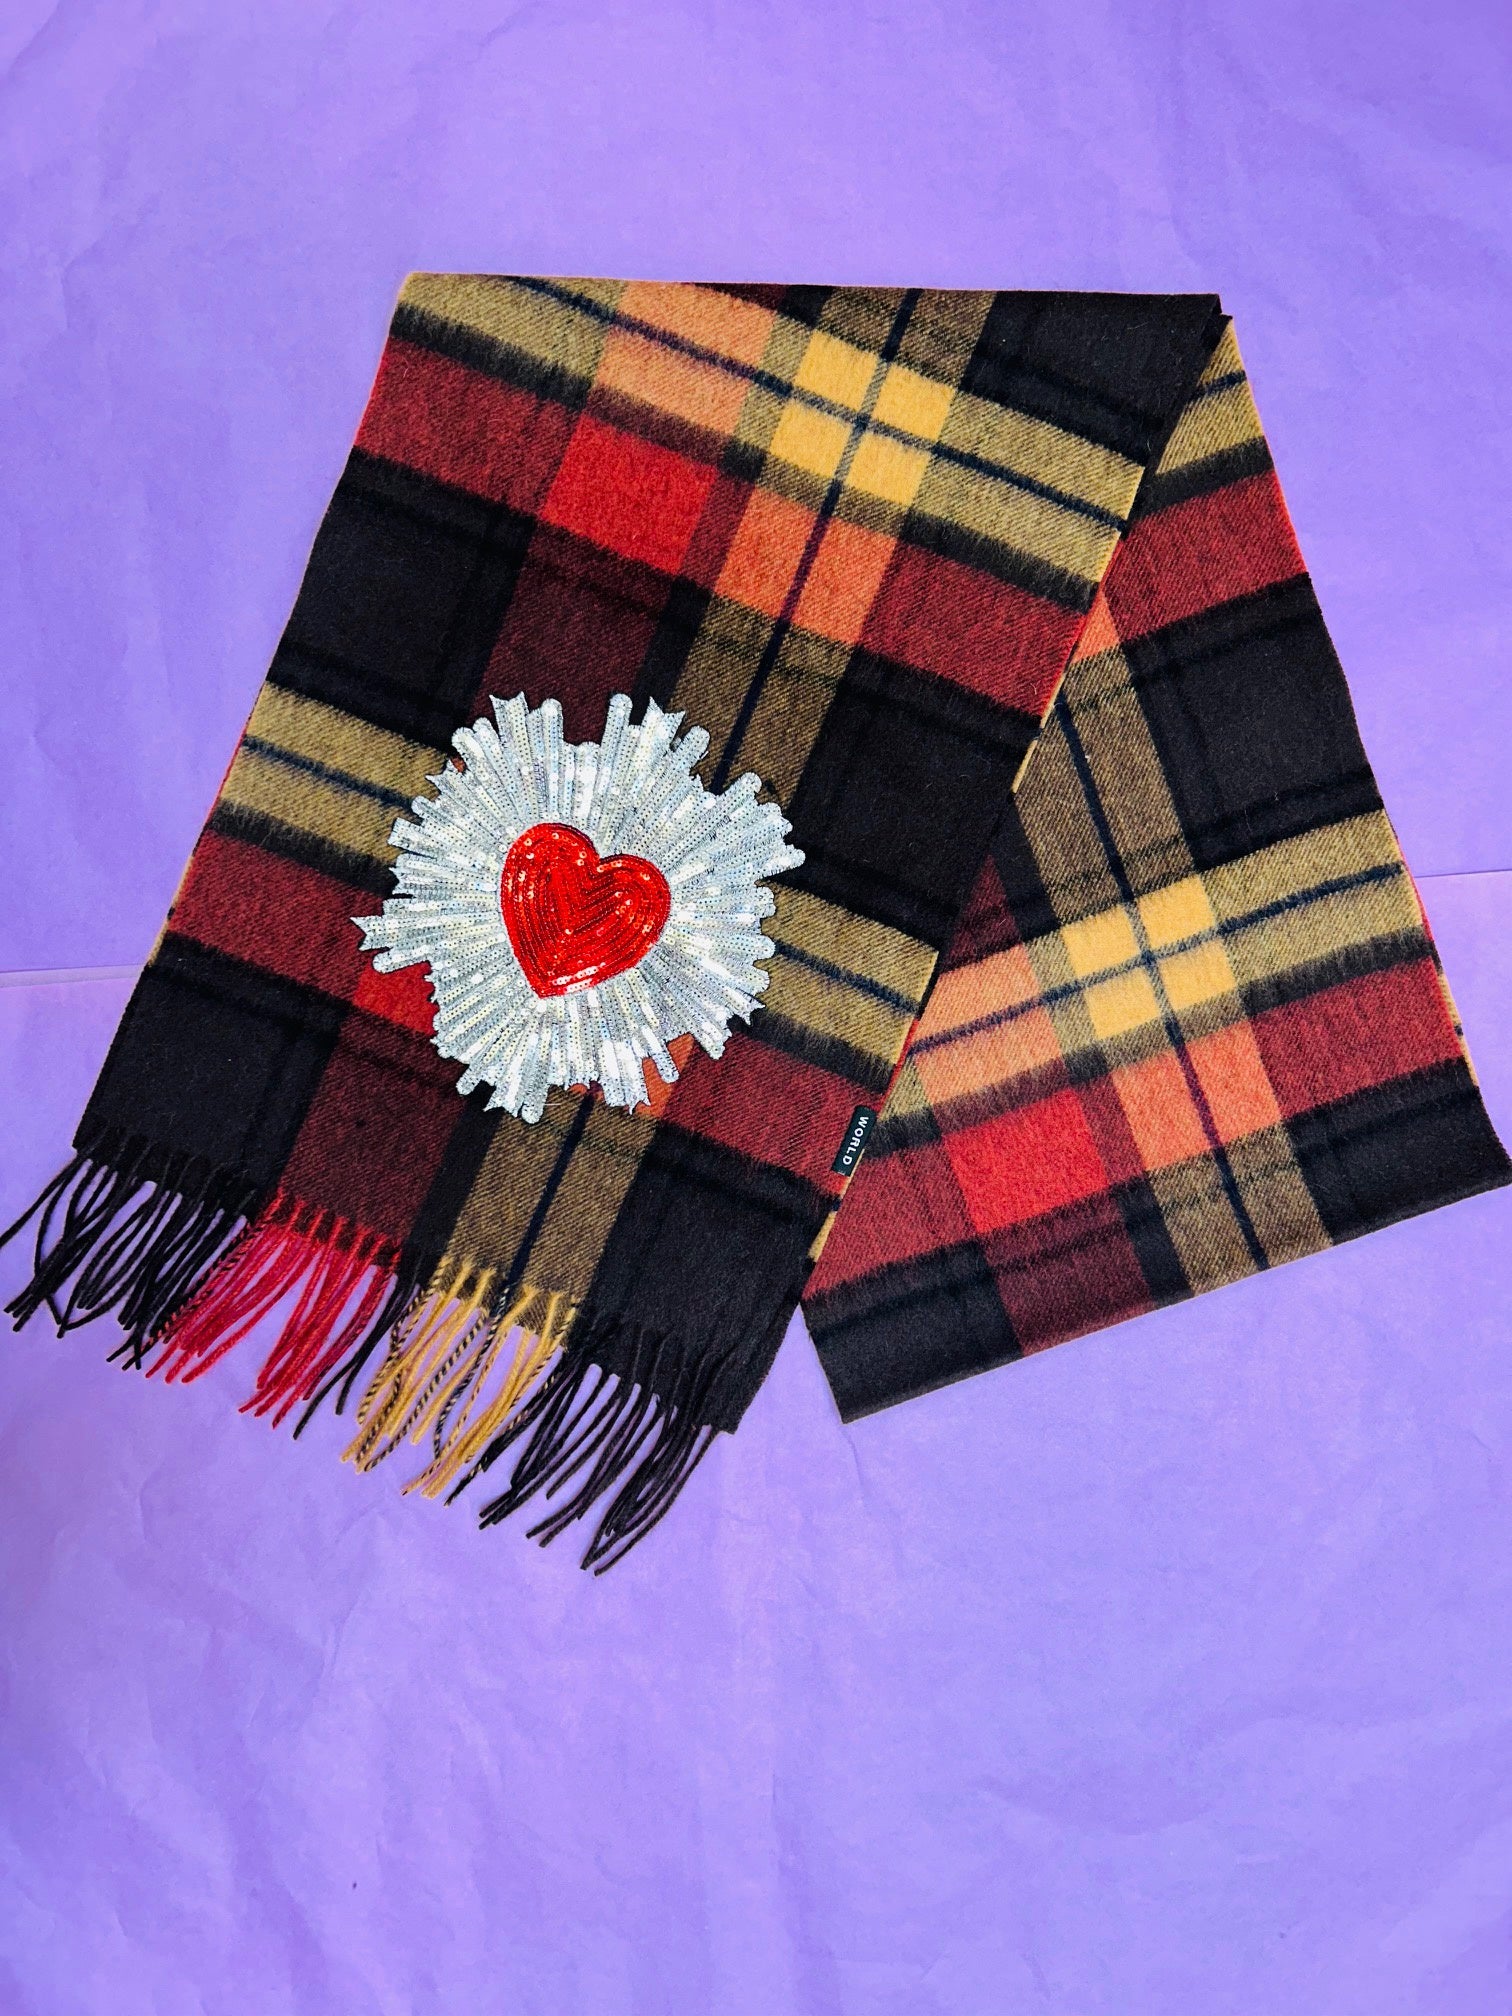 WORLD 24 Lambswool COUTURE Scarf - Sunset Check w/Heart